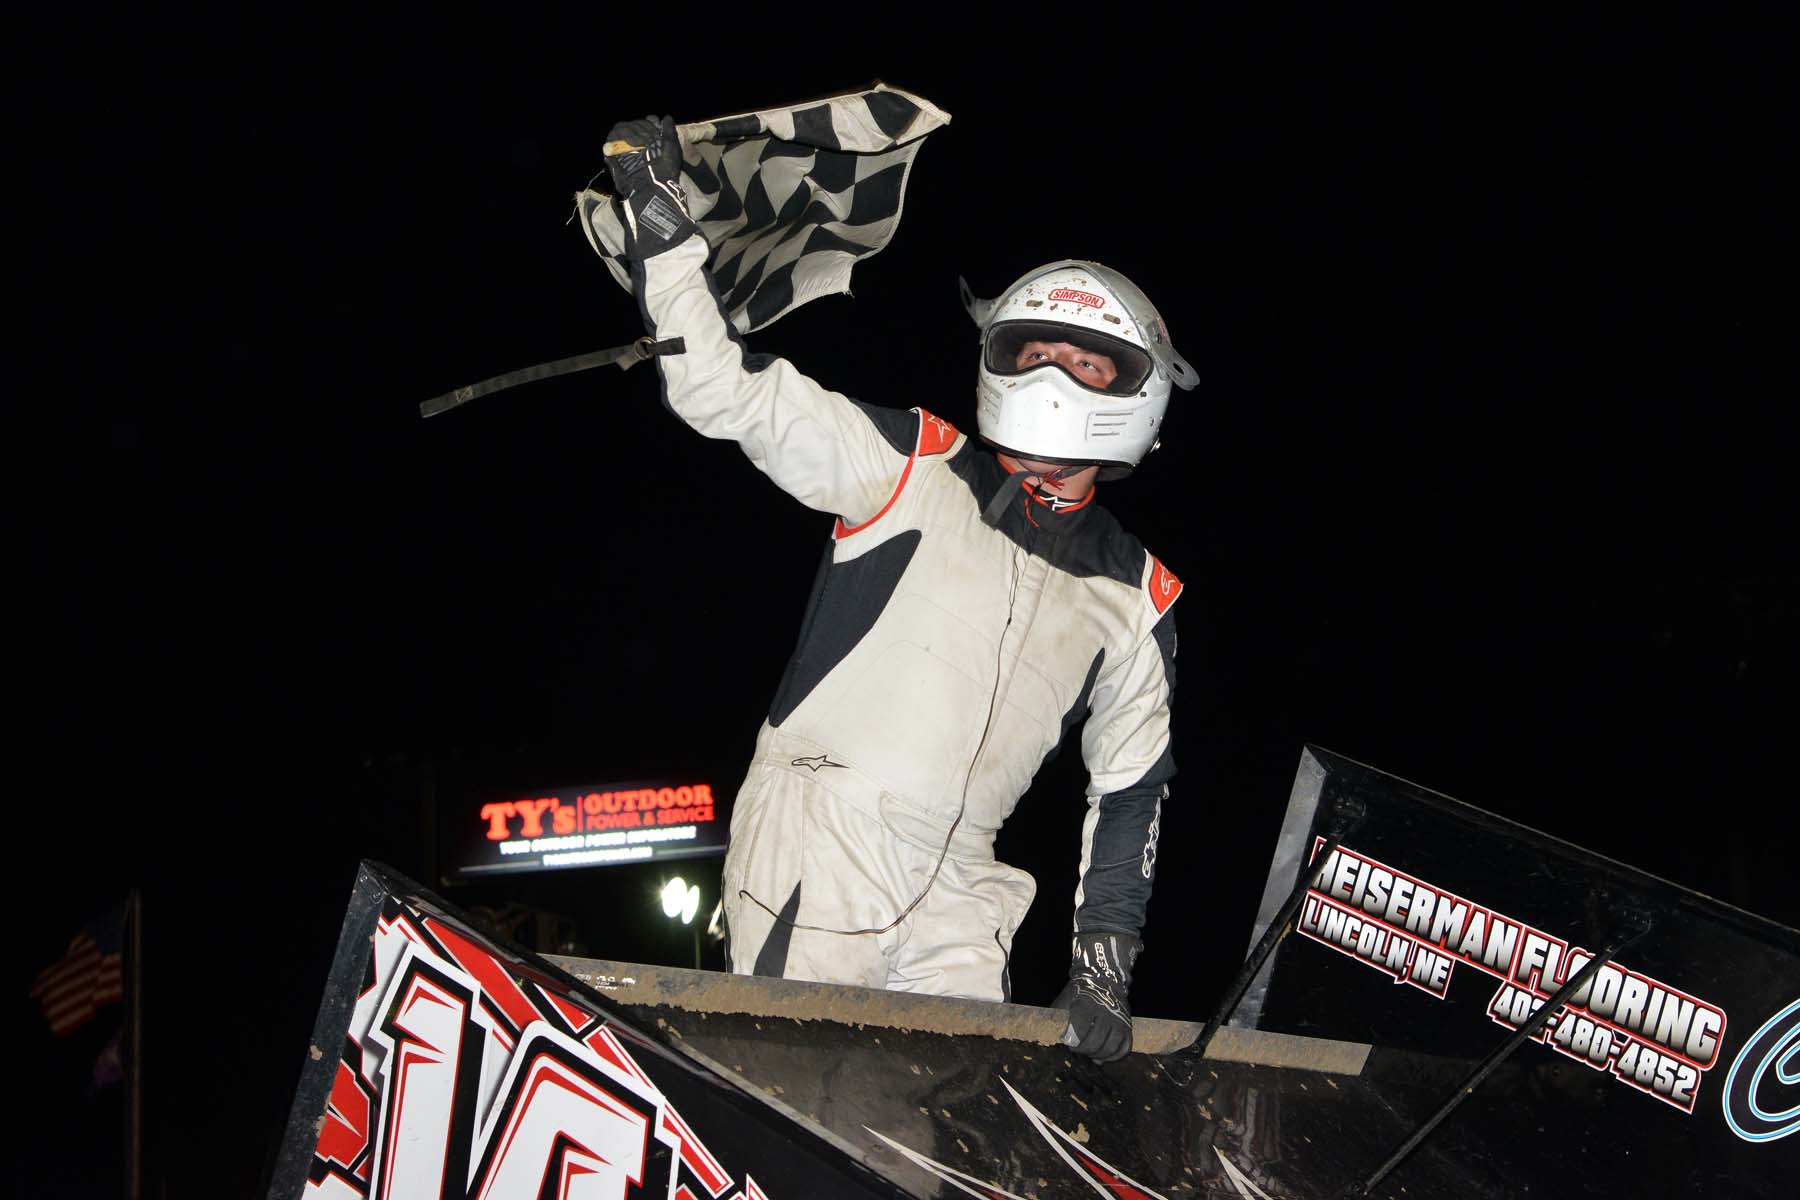 Danley wins at Eagle Raceway’s Party on !